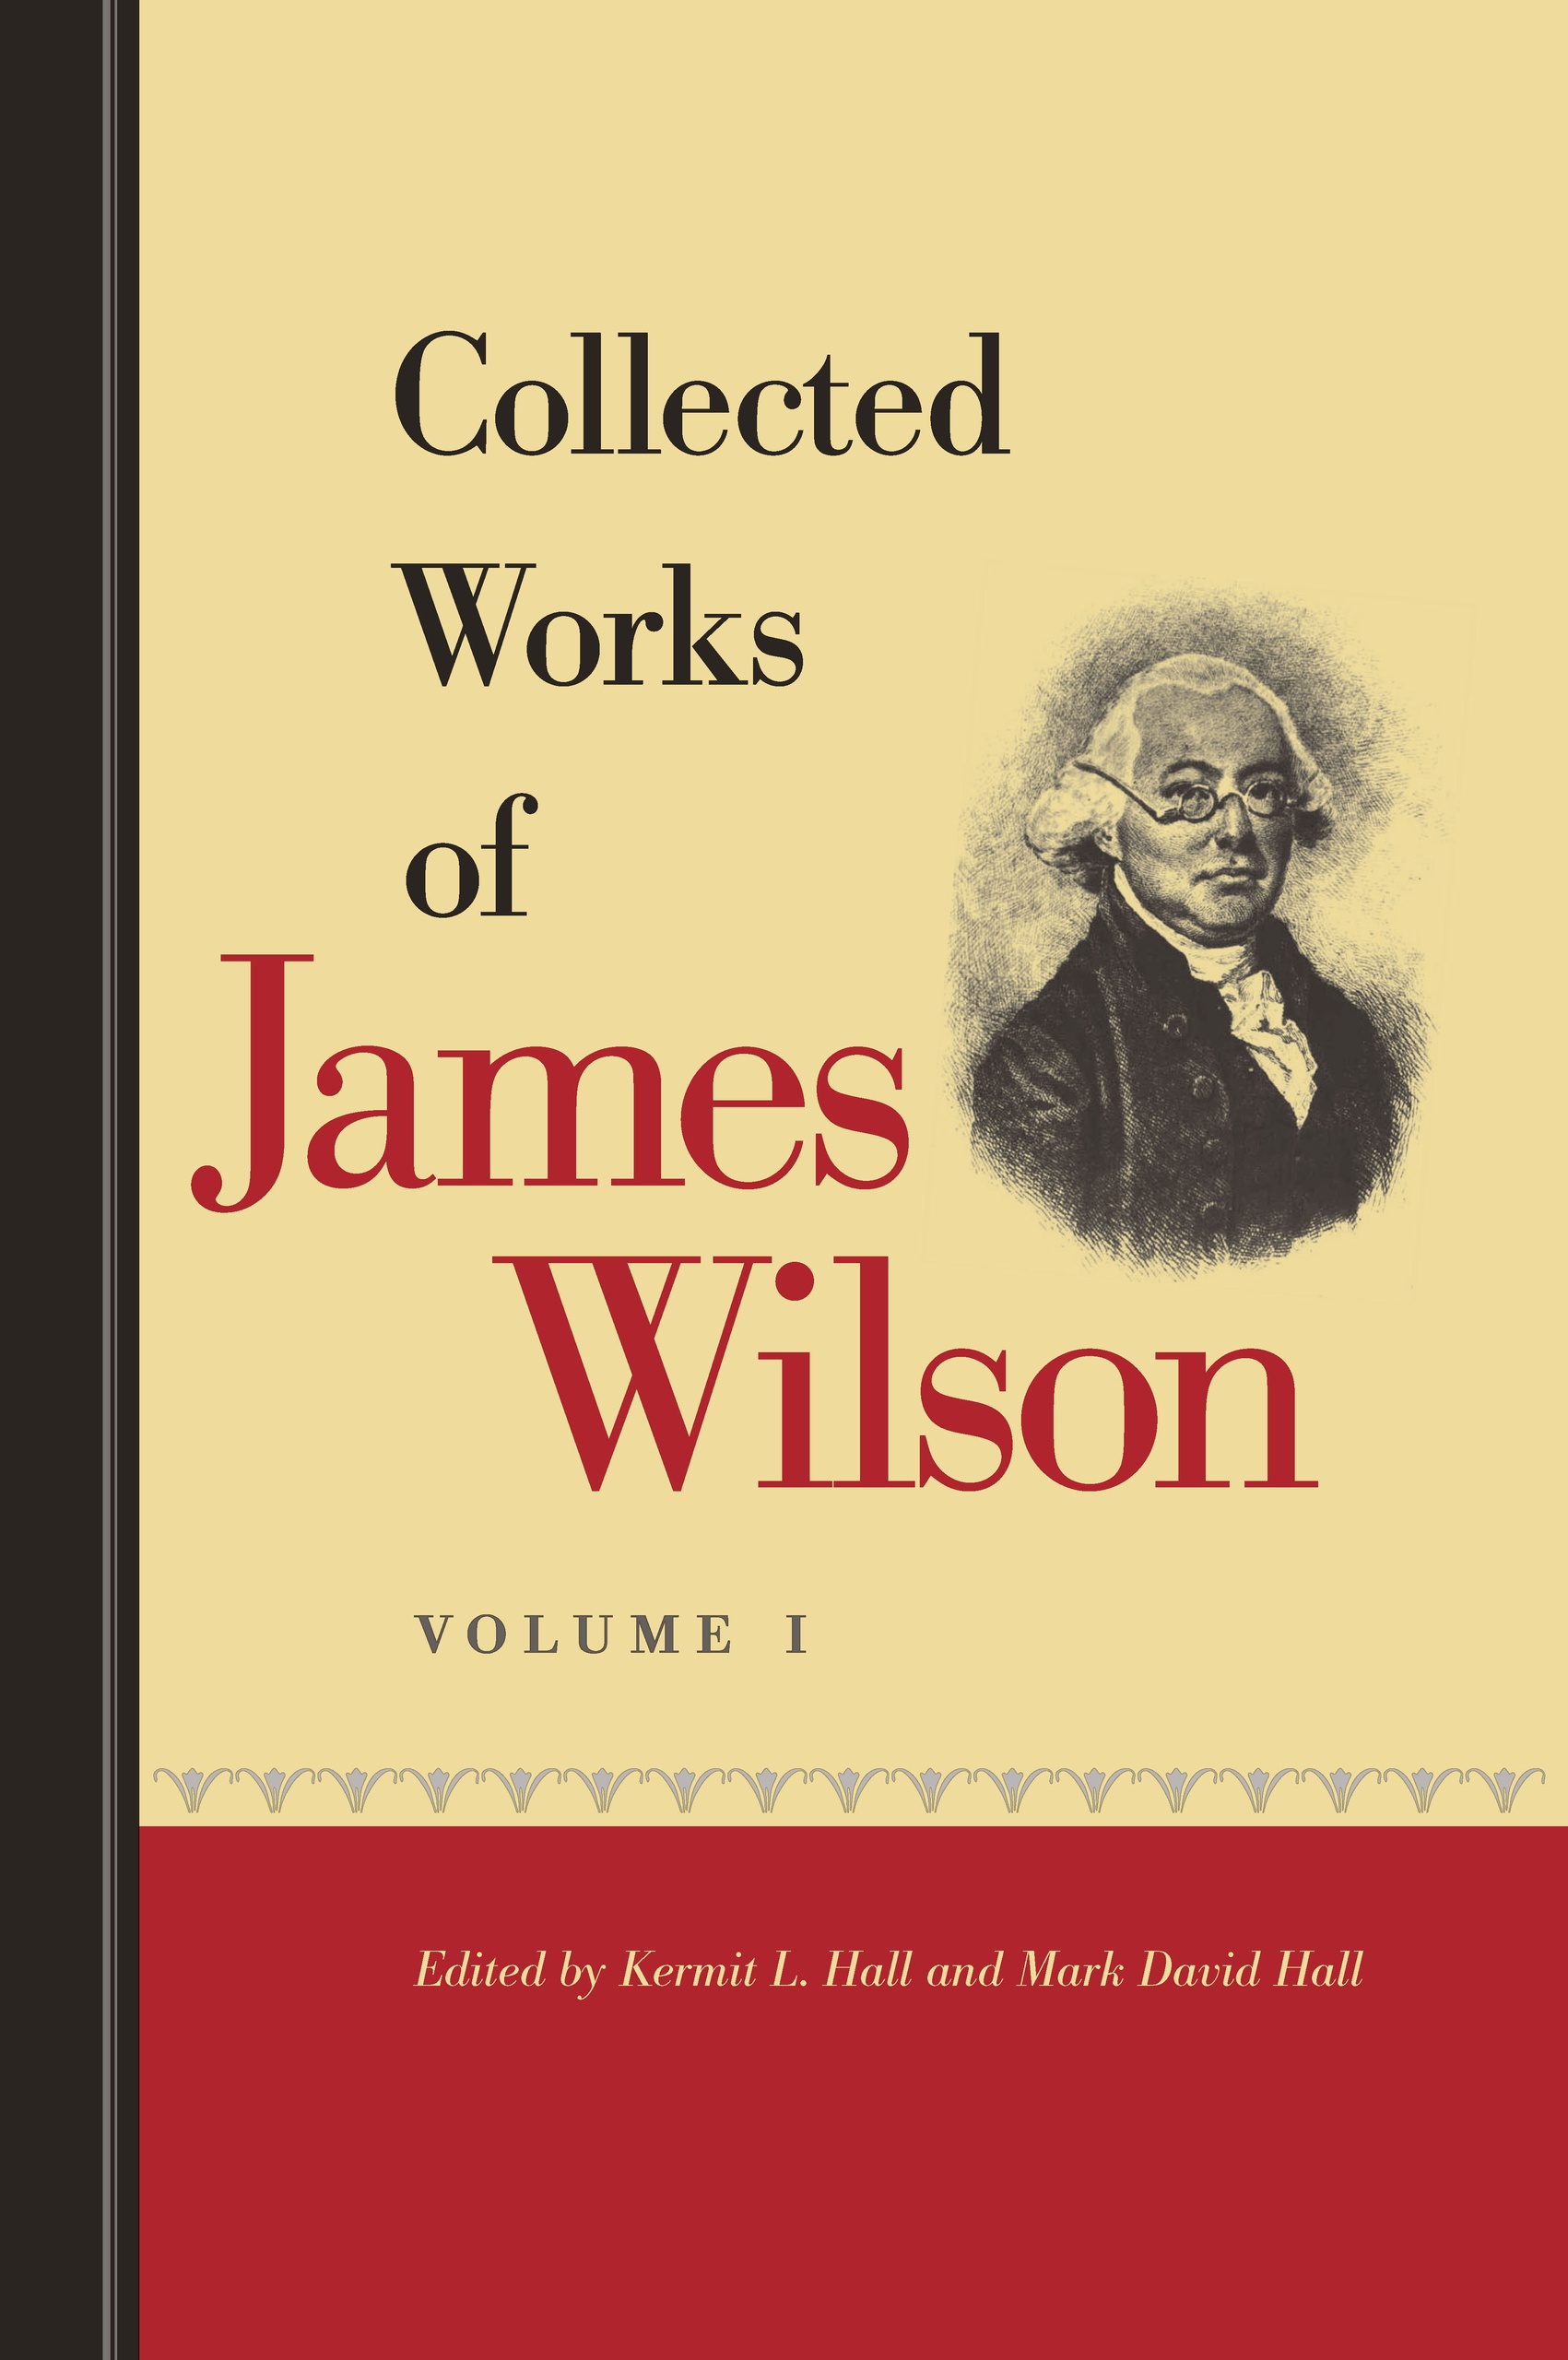 Collected Works of James Wilson, vol. 1